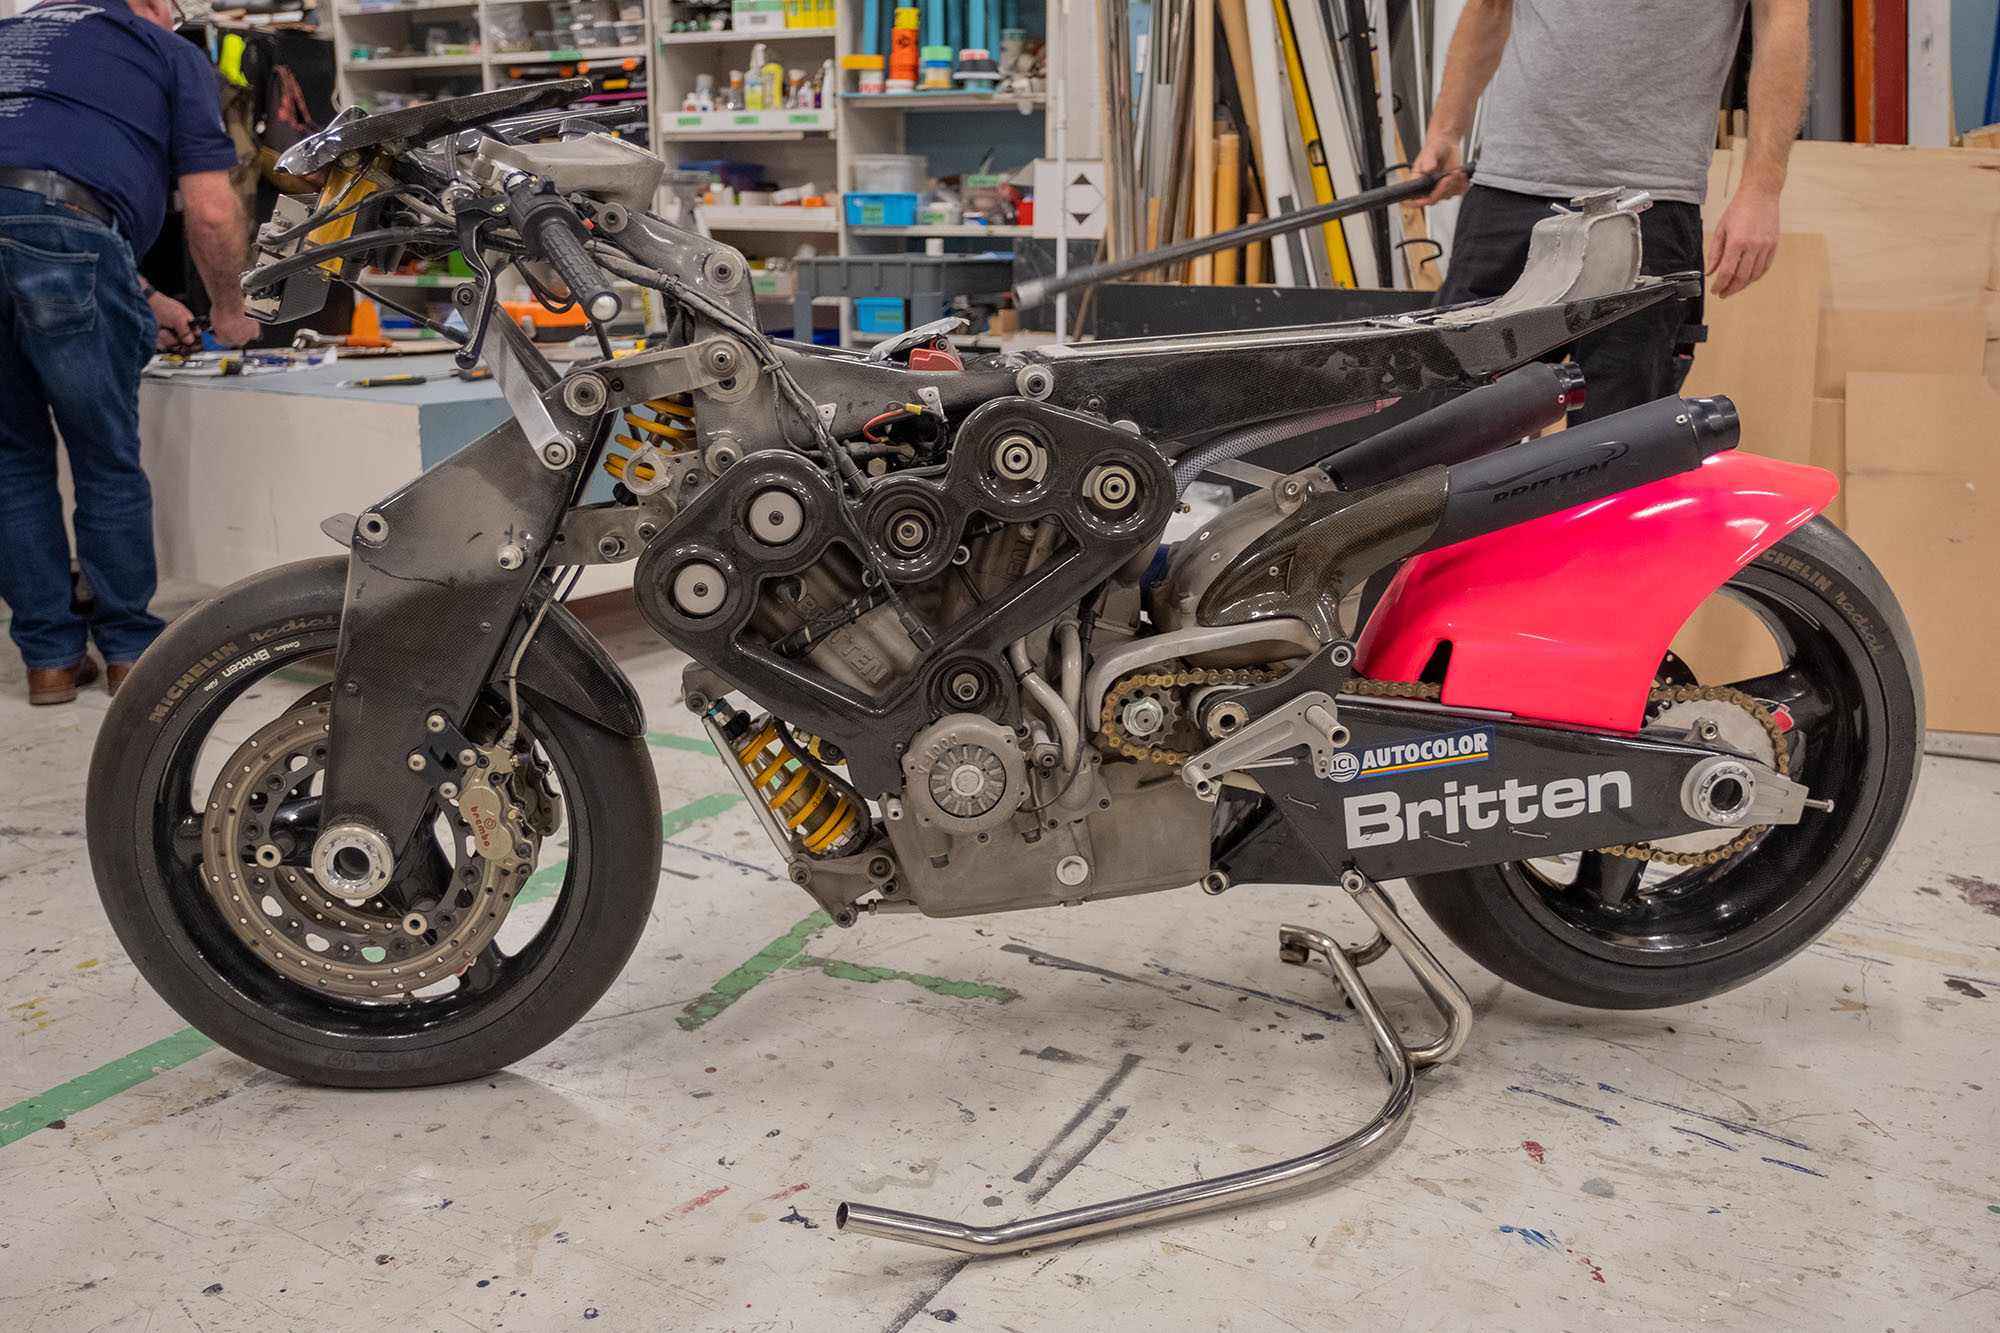 The Britten Bike with its bodywork removed, exposing the engine and parts usually hidden